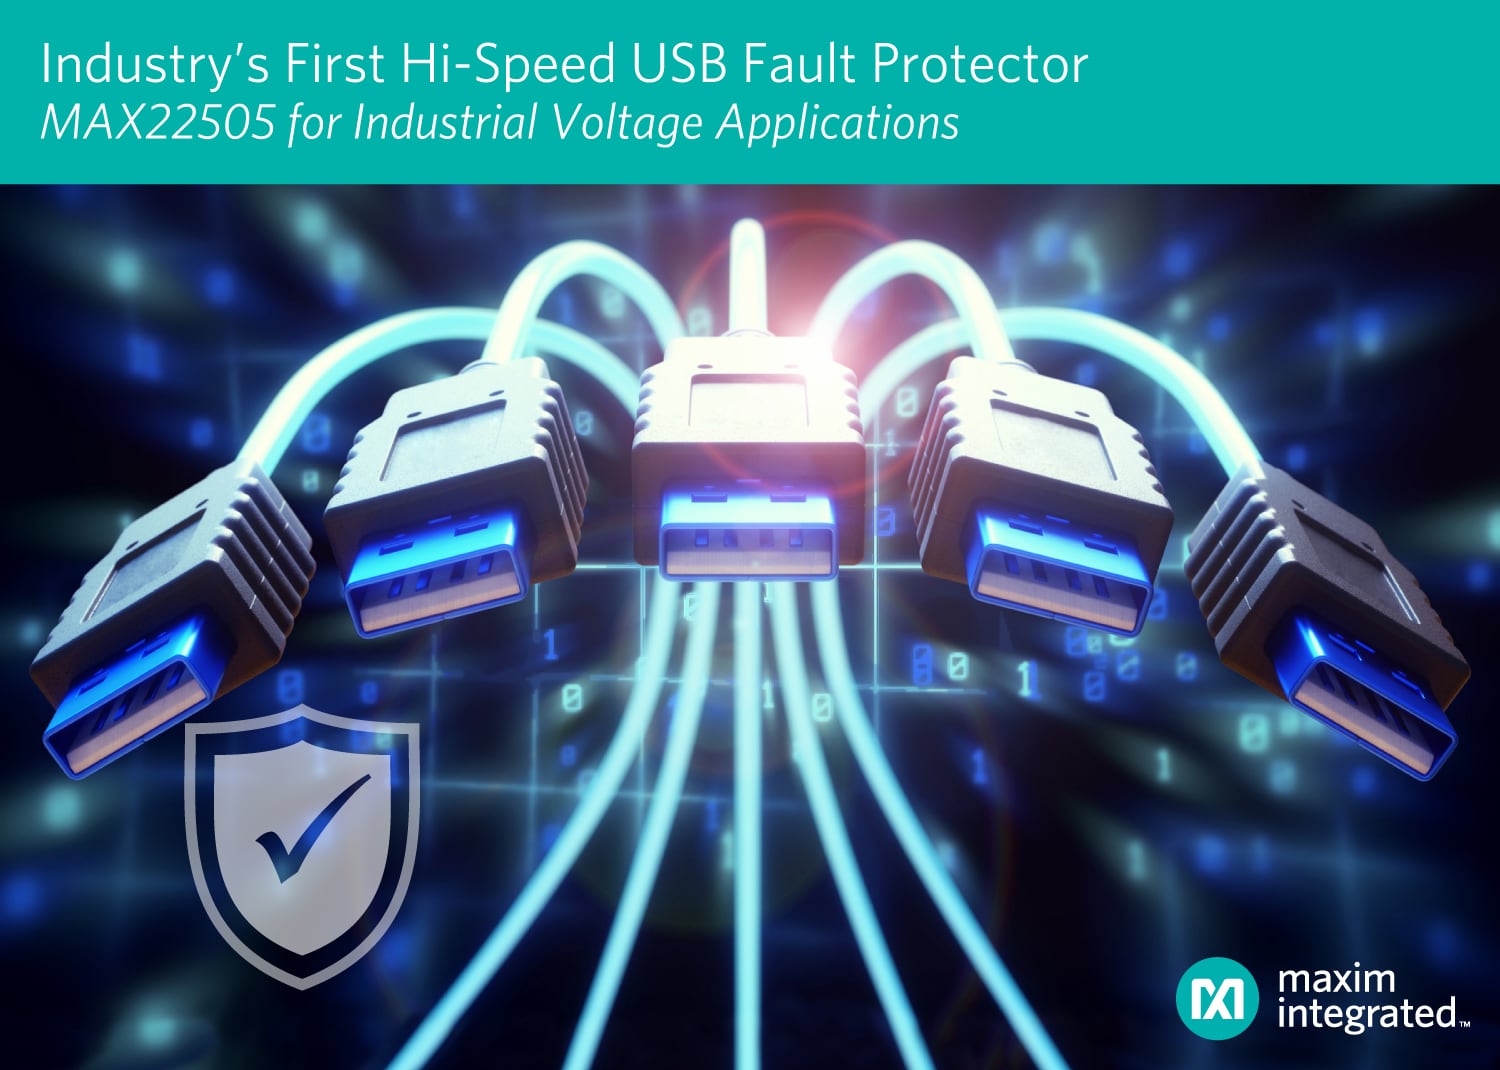 The Industry’s First True Fault Protection Solution for High-Speed USB Ports and Industrial Voltage Applications